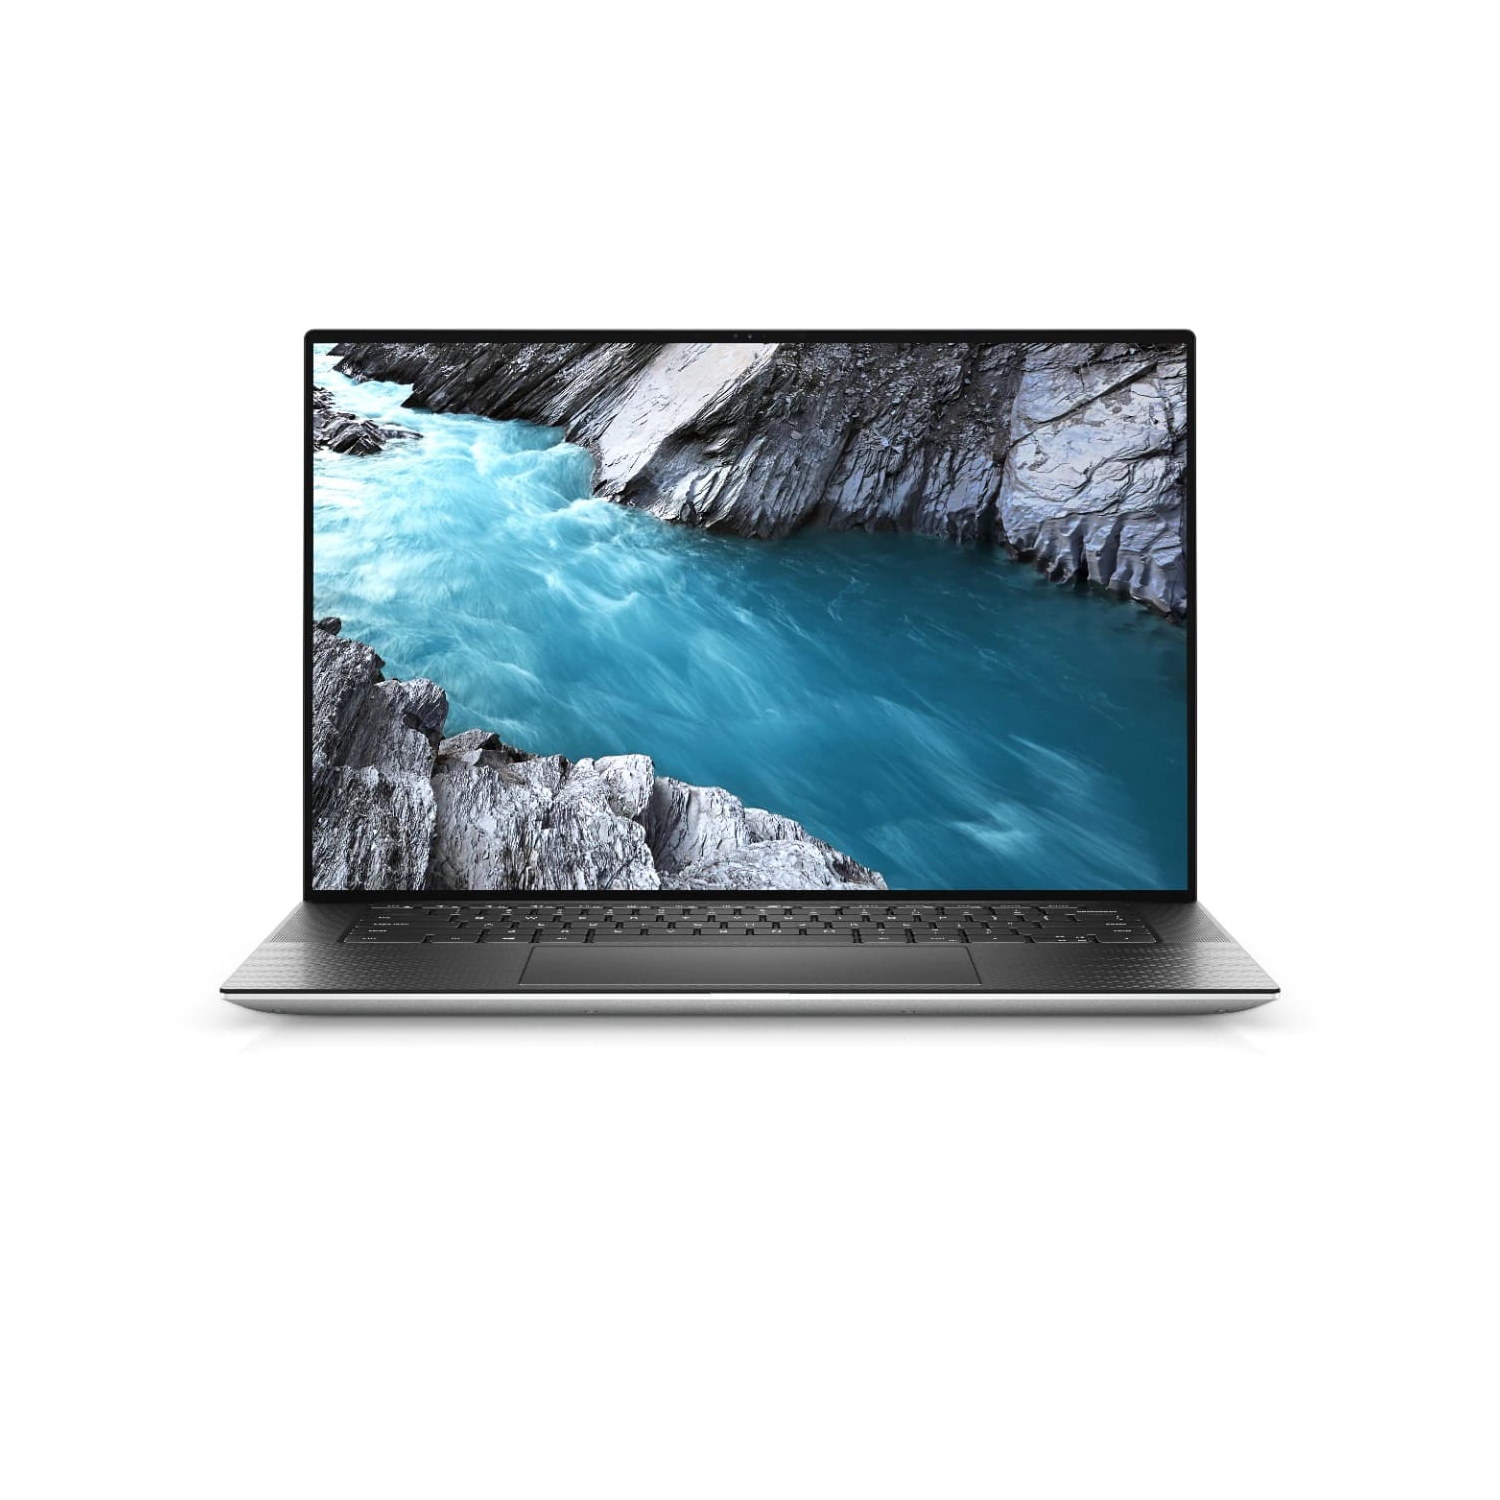 Refurbished (Excellent) - Dell XPS 15 9500 Laptop (2020) | 15" FHD+ | Core i9 - 2TB SSD - 64GB RAM - 1650 Ti | 8 Cores @ 5.3 GHz - 10th Gen CPU Certified Refurbished